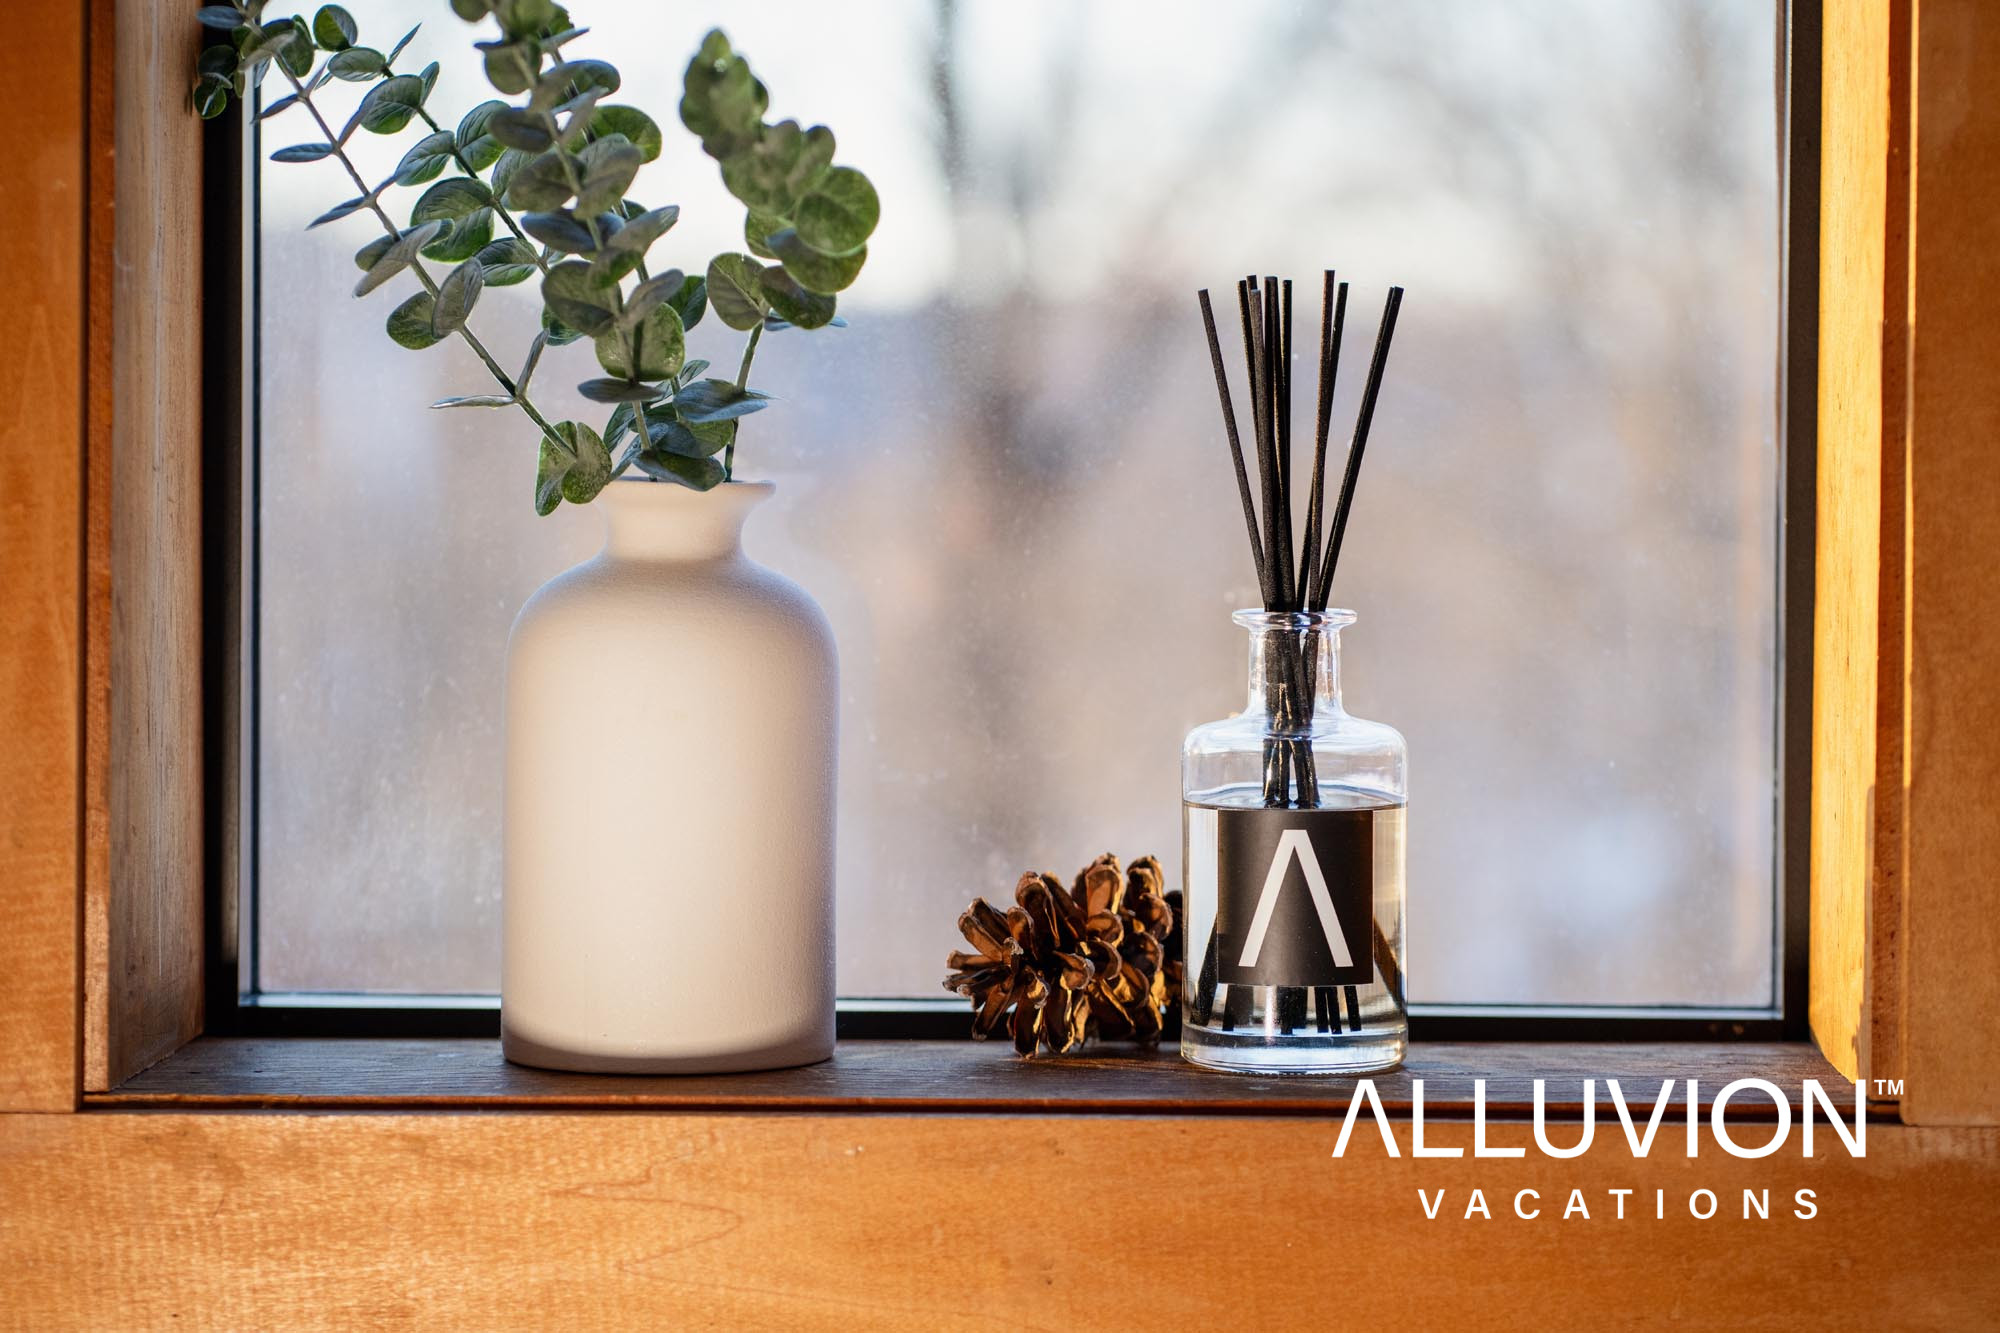 Alluvion Vacations: Embracing the Meaning Economy with Our Digital Detox, Aromatherapy, and Sustainability Initiatives